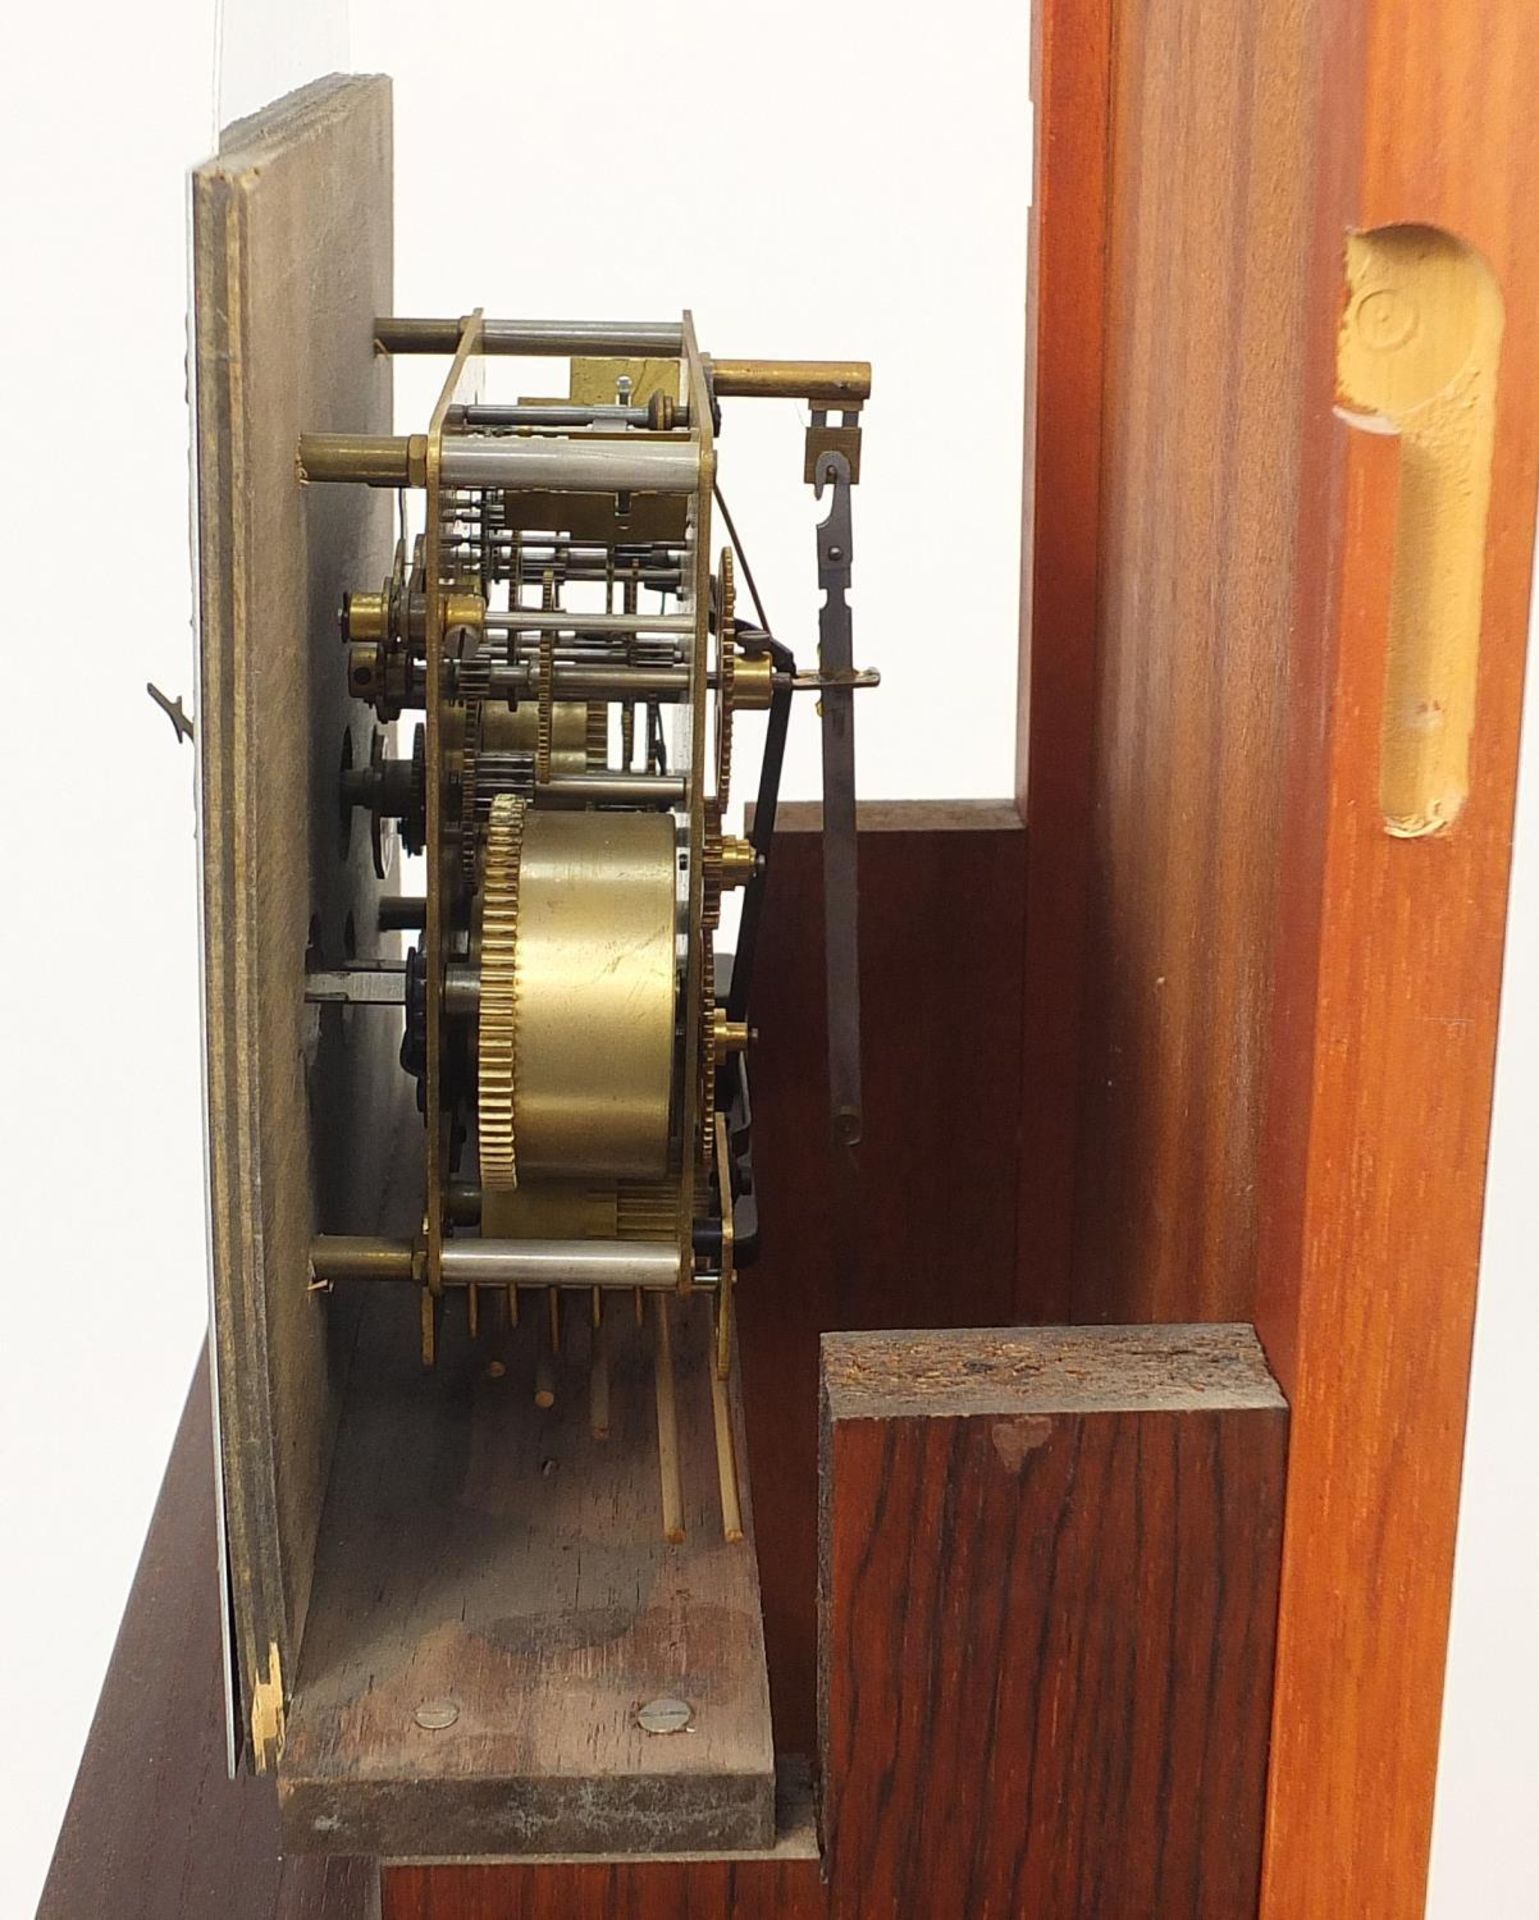 Tempest Fugit granddaughter clock with visible weights and pendulum, 149cm high - Image 8 of 8